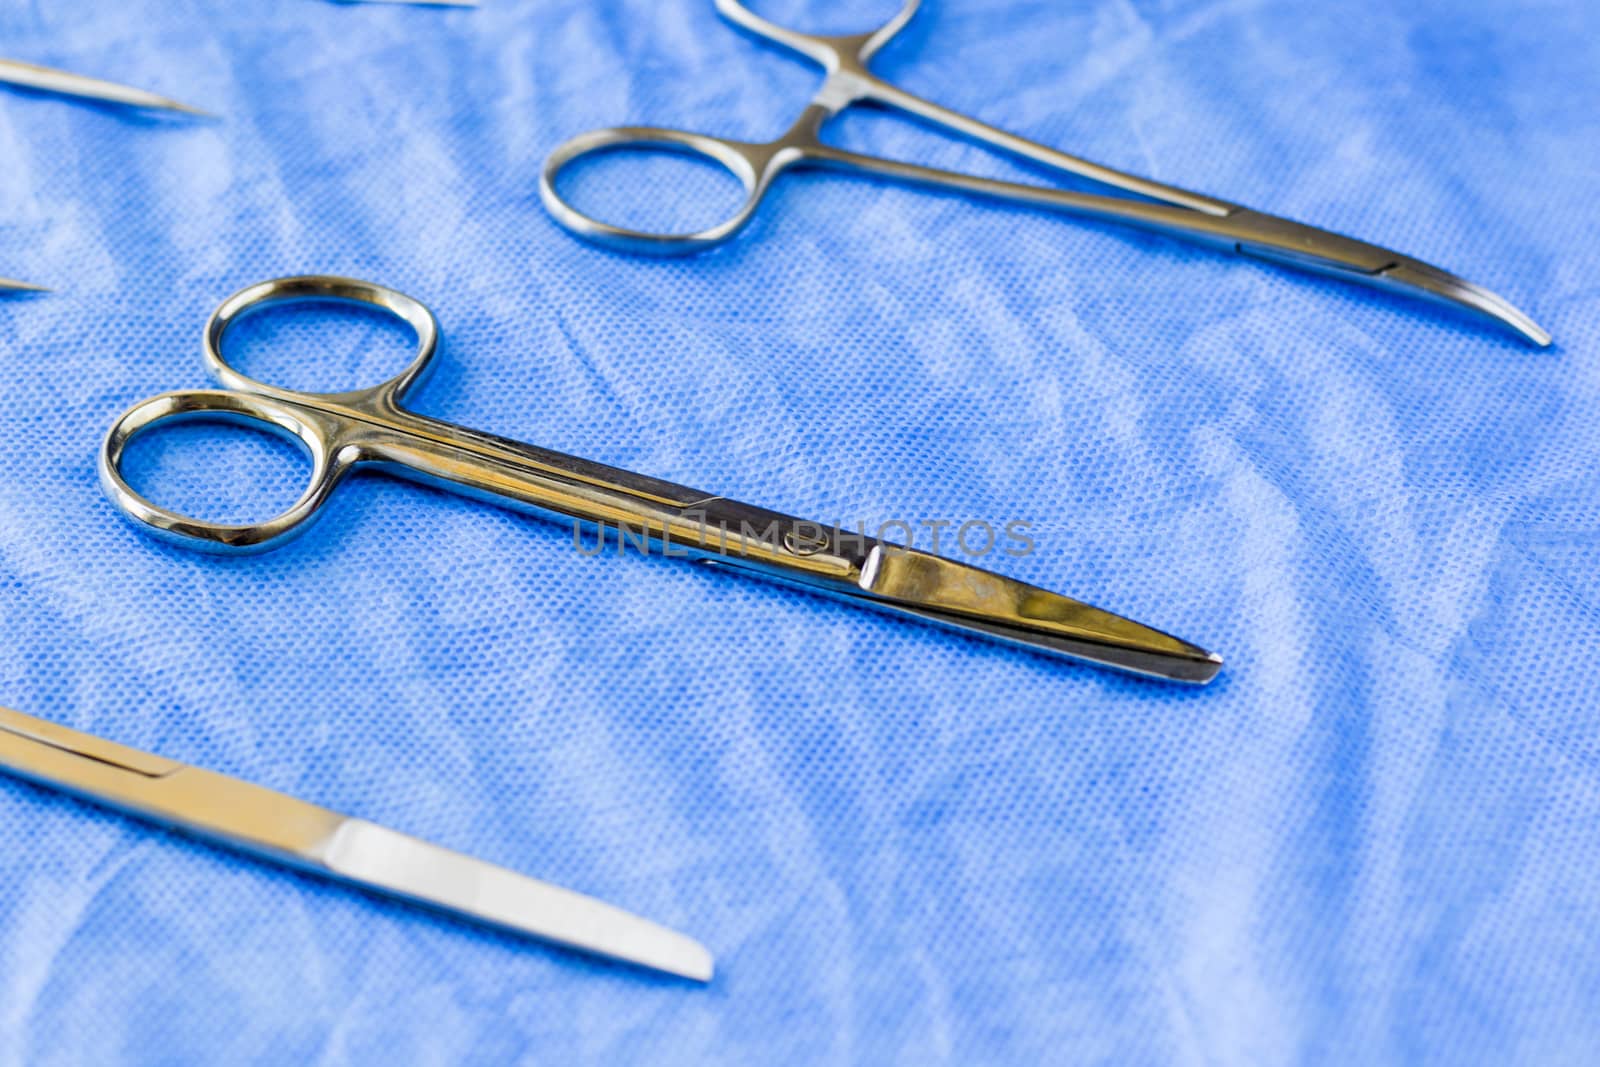 Surgical scissors on the blue sterile table, operation table